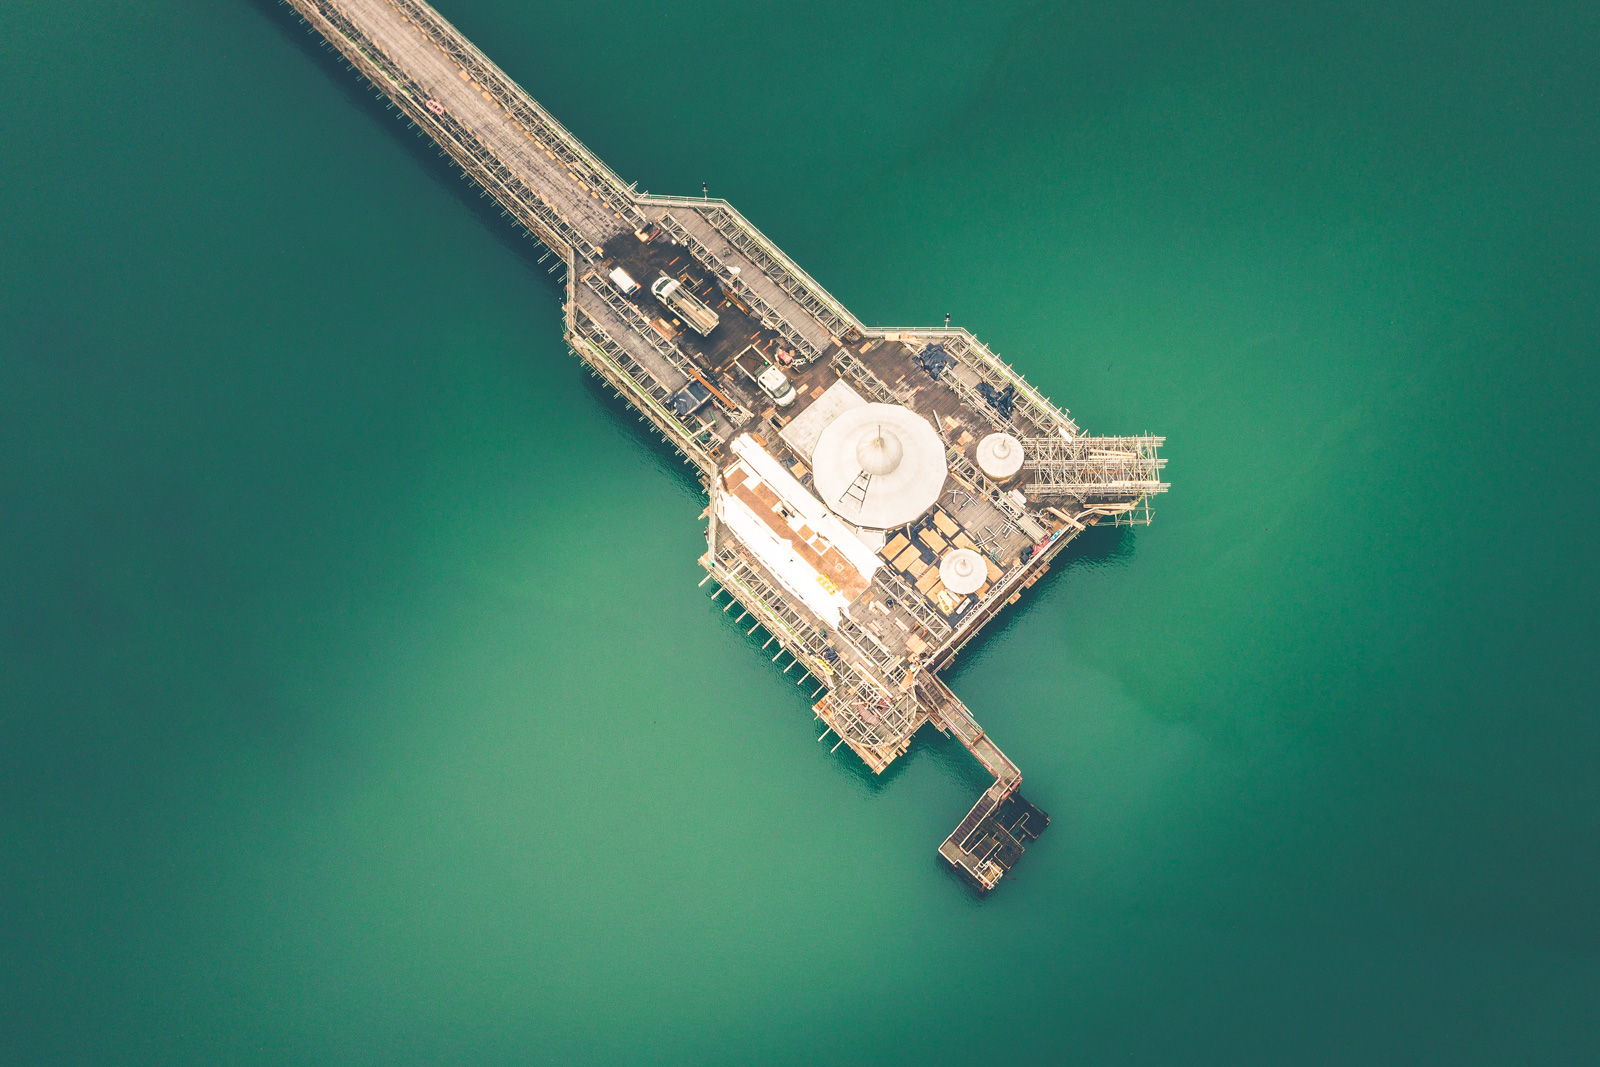 An image taken directly above the pier during its restoration job.